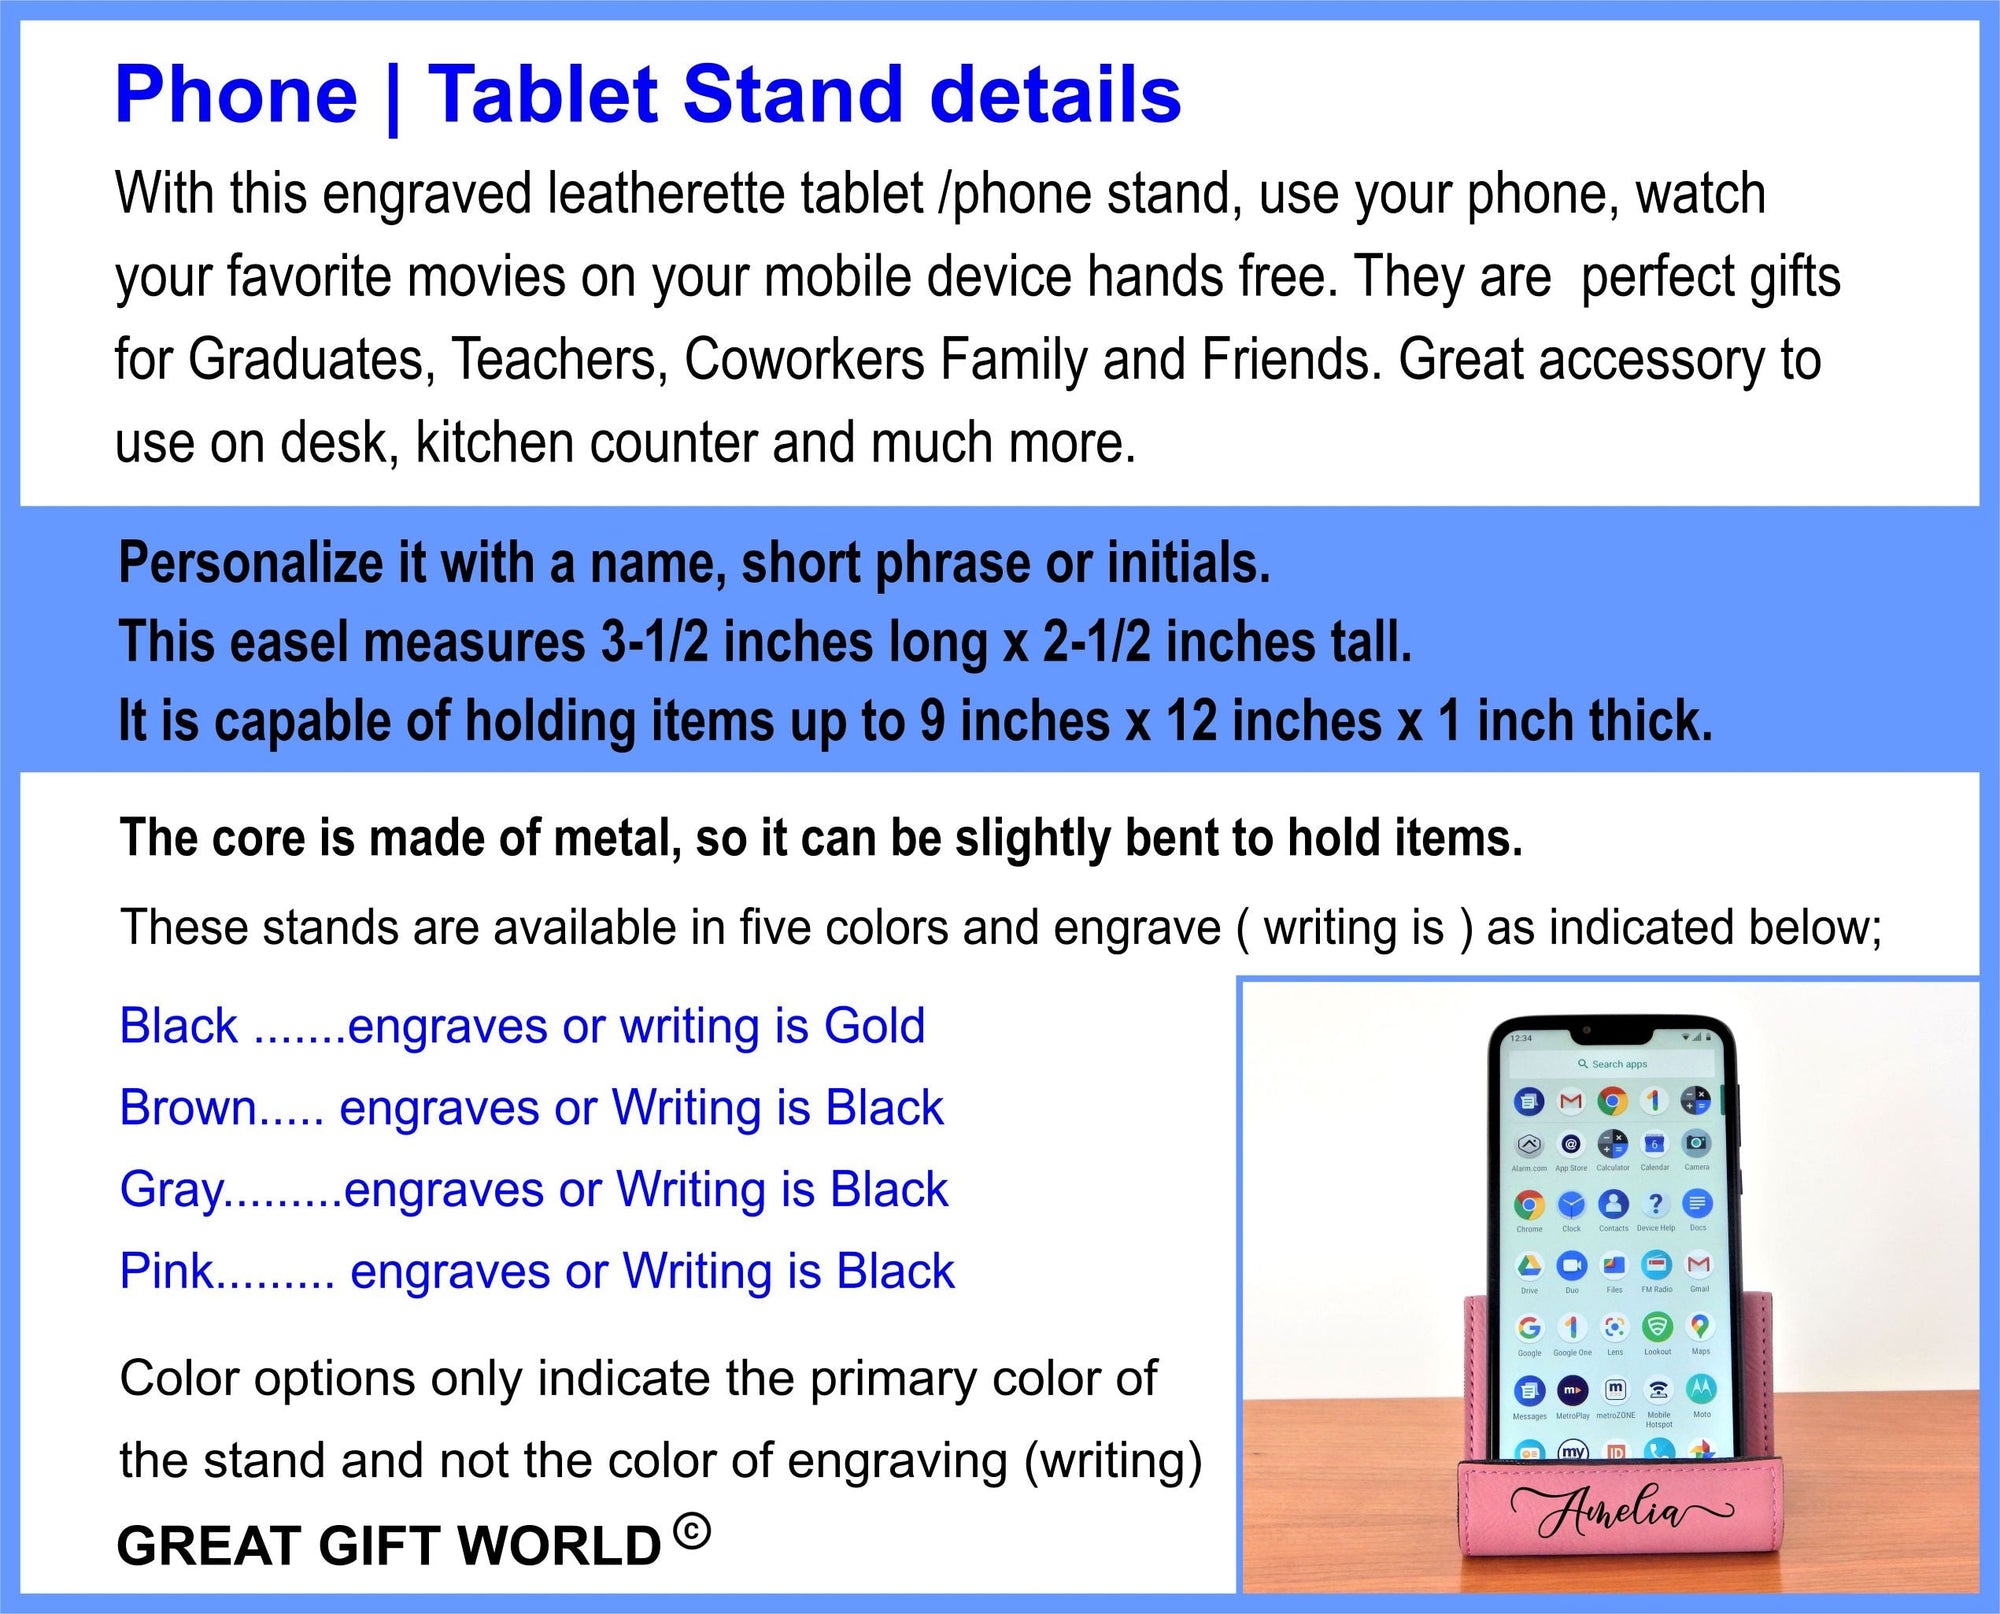 Smart Phone iPad iPhone Stand for Desk |Tablet Holder | Personalized Cell Phone Easel